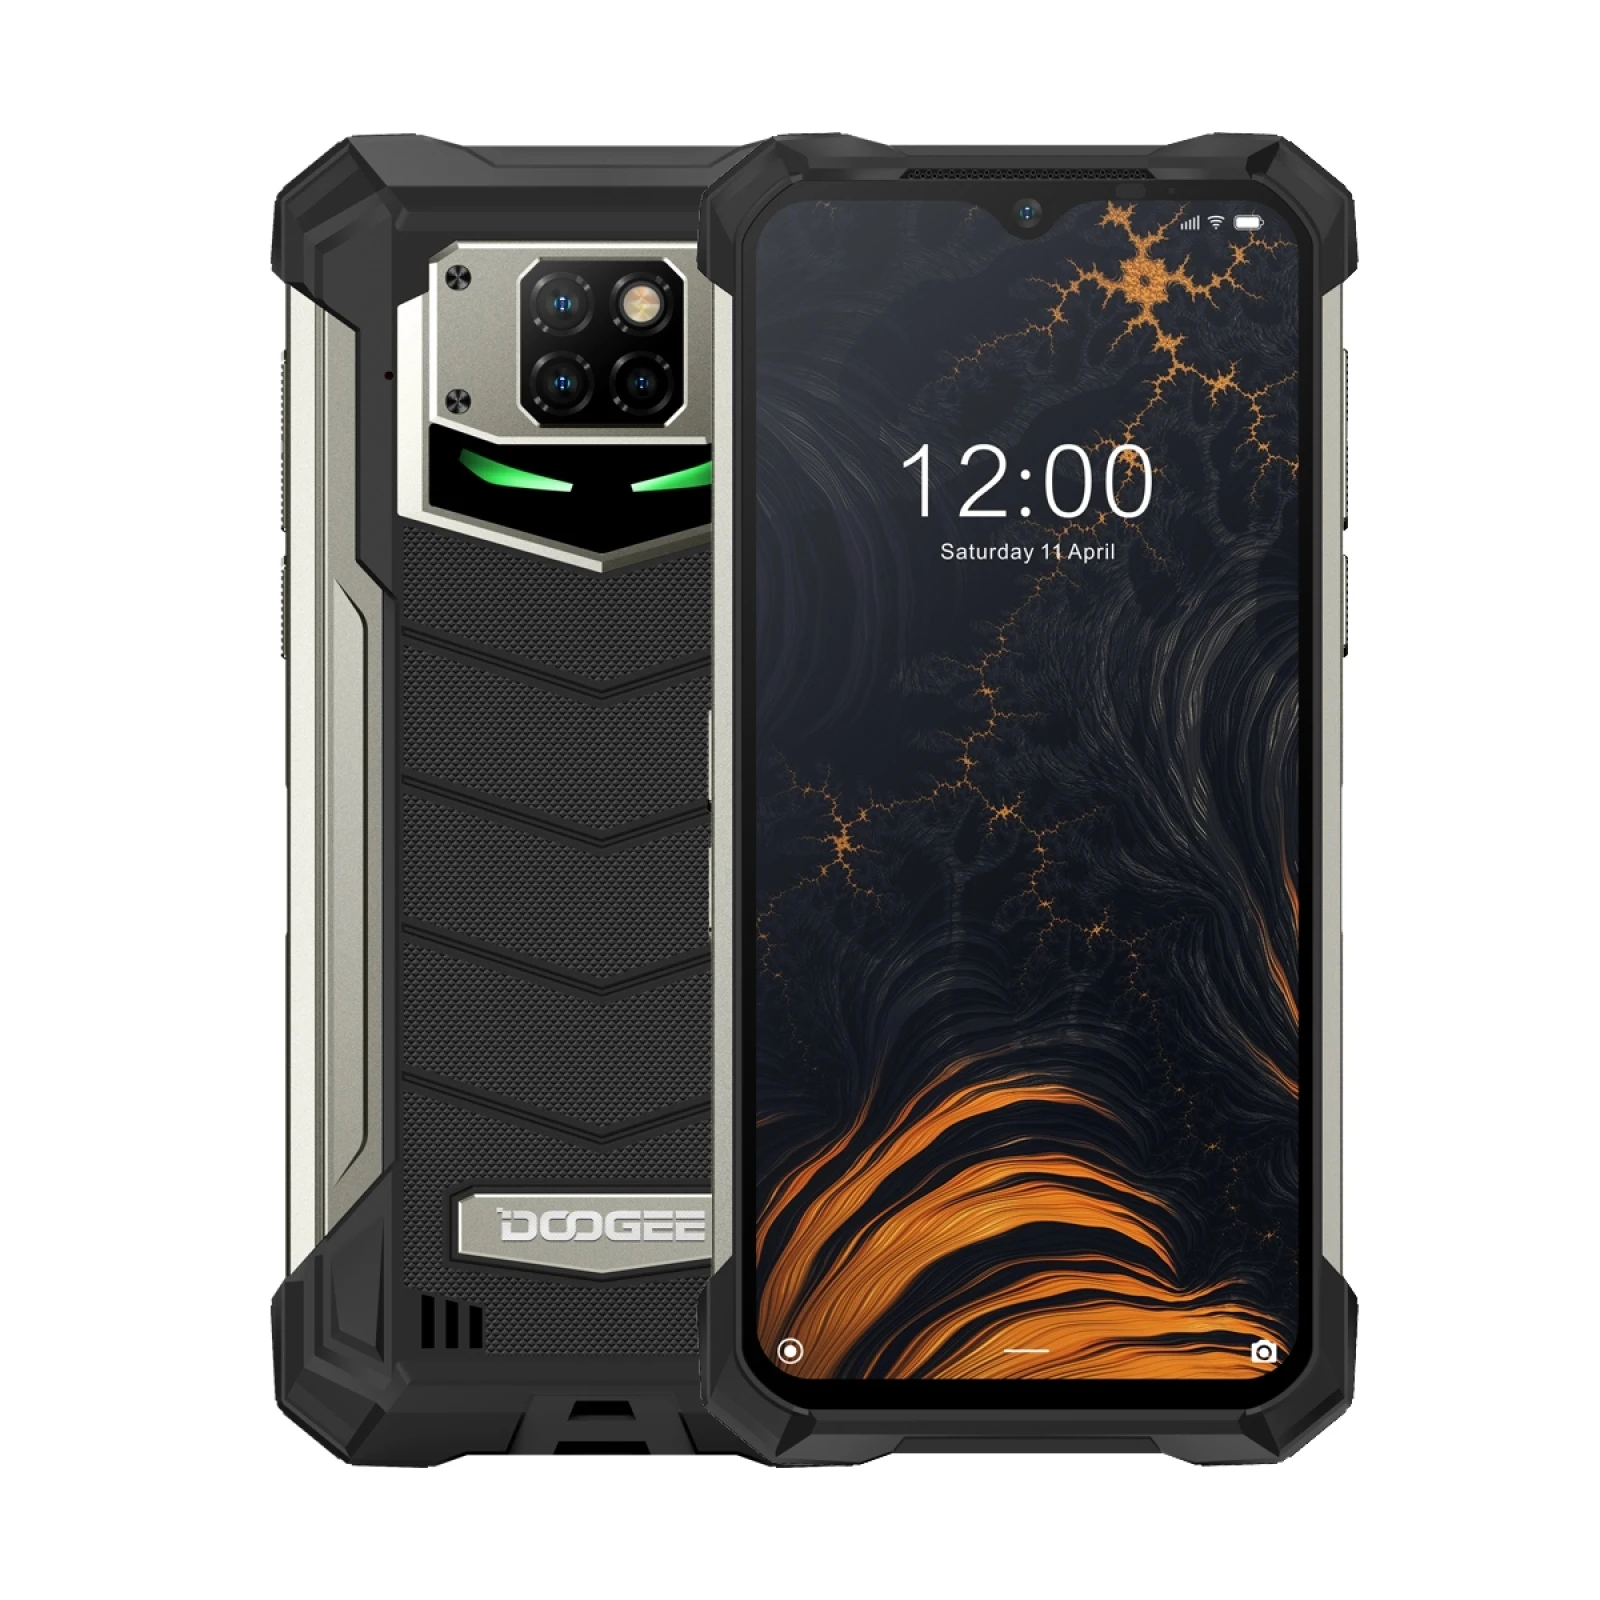 DOOGEE S88 Plus Rugged Phone Waterproof 8GB+128GB ROM 6.3'' Android MTK Helio P70 Octa Core 2.1GH 4G LTE NFC SOS Wireless-charge enlarge